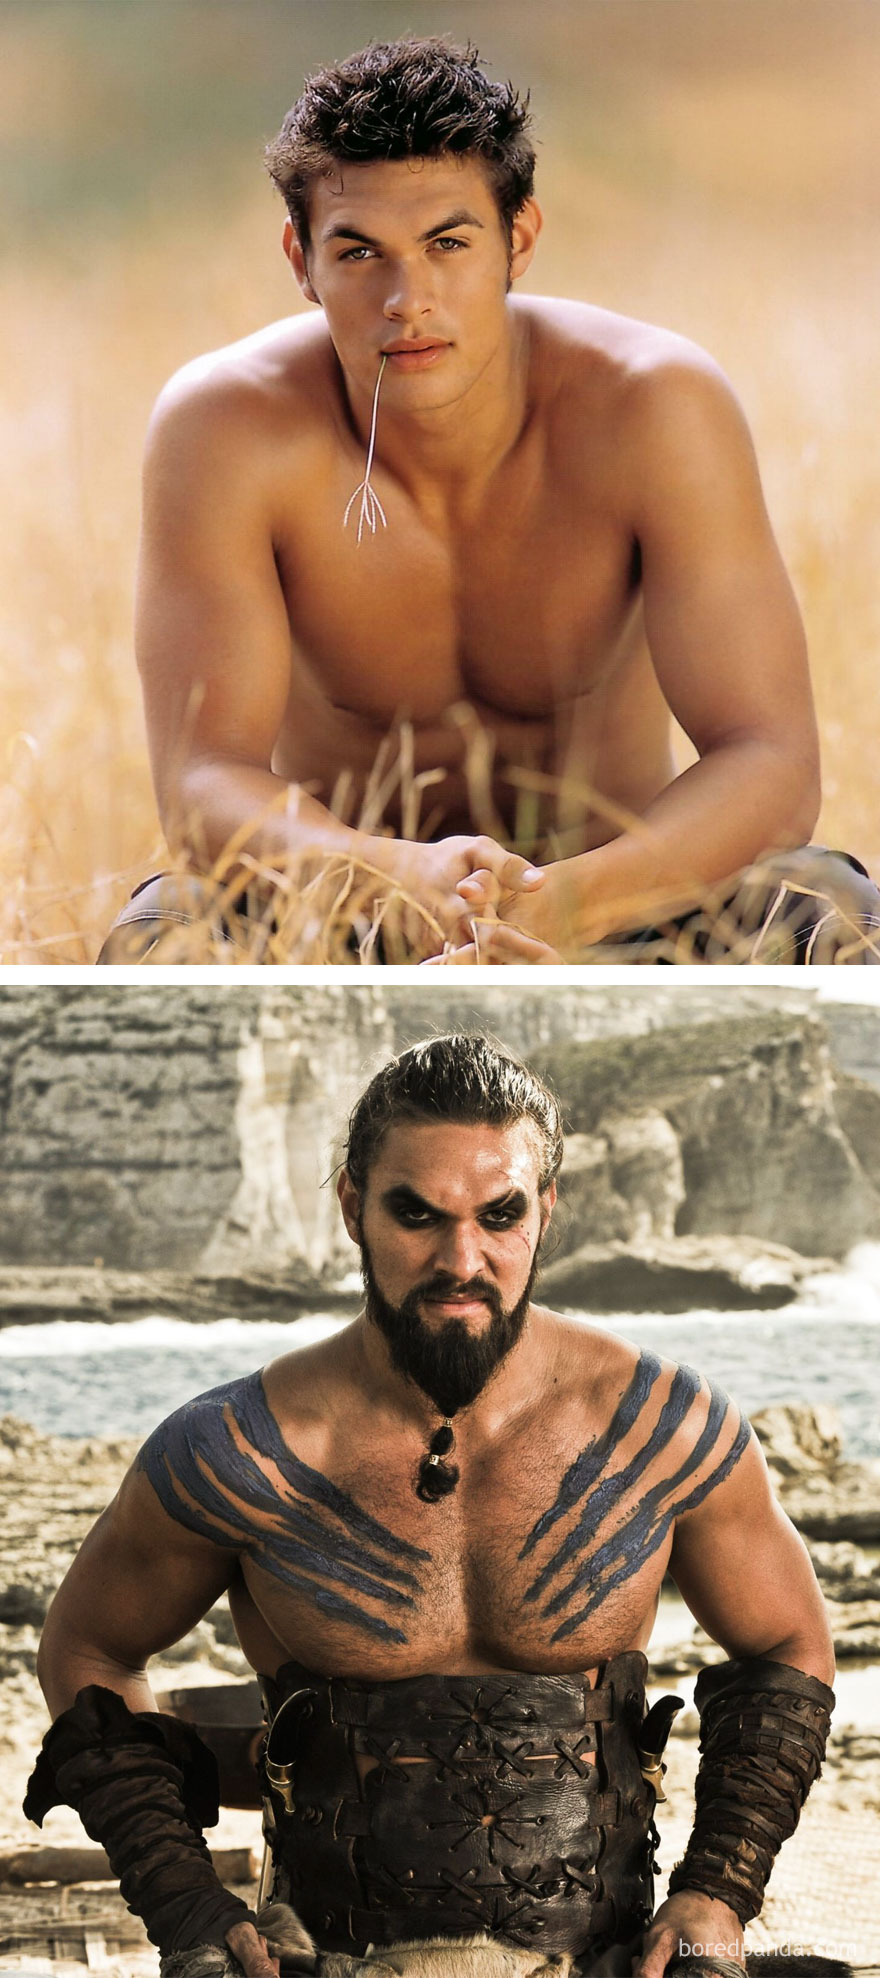 Jason Momoa As Jason (In 2003's Baywatch) And As Khal Drogo (In GoT)